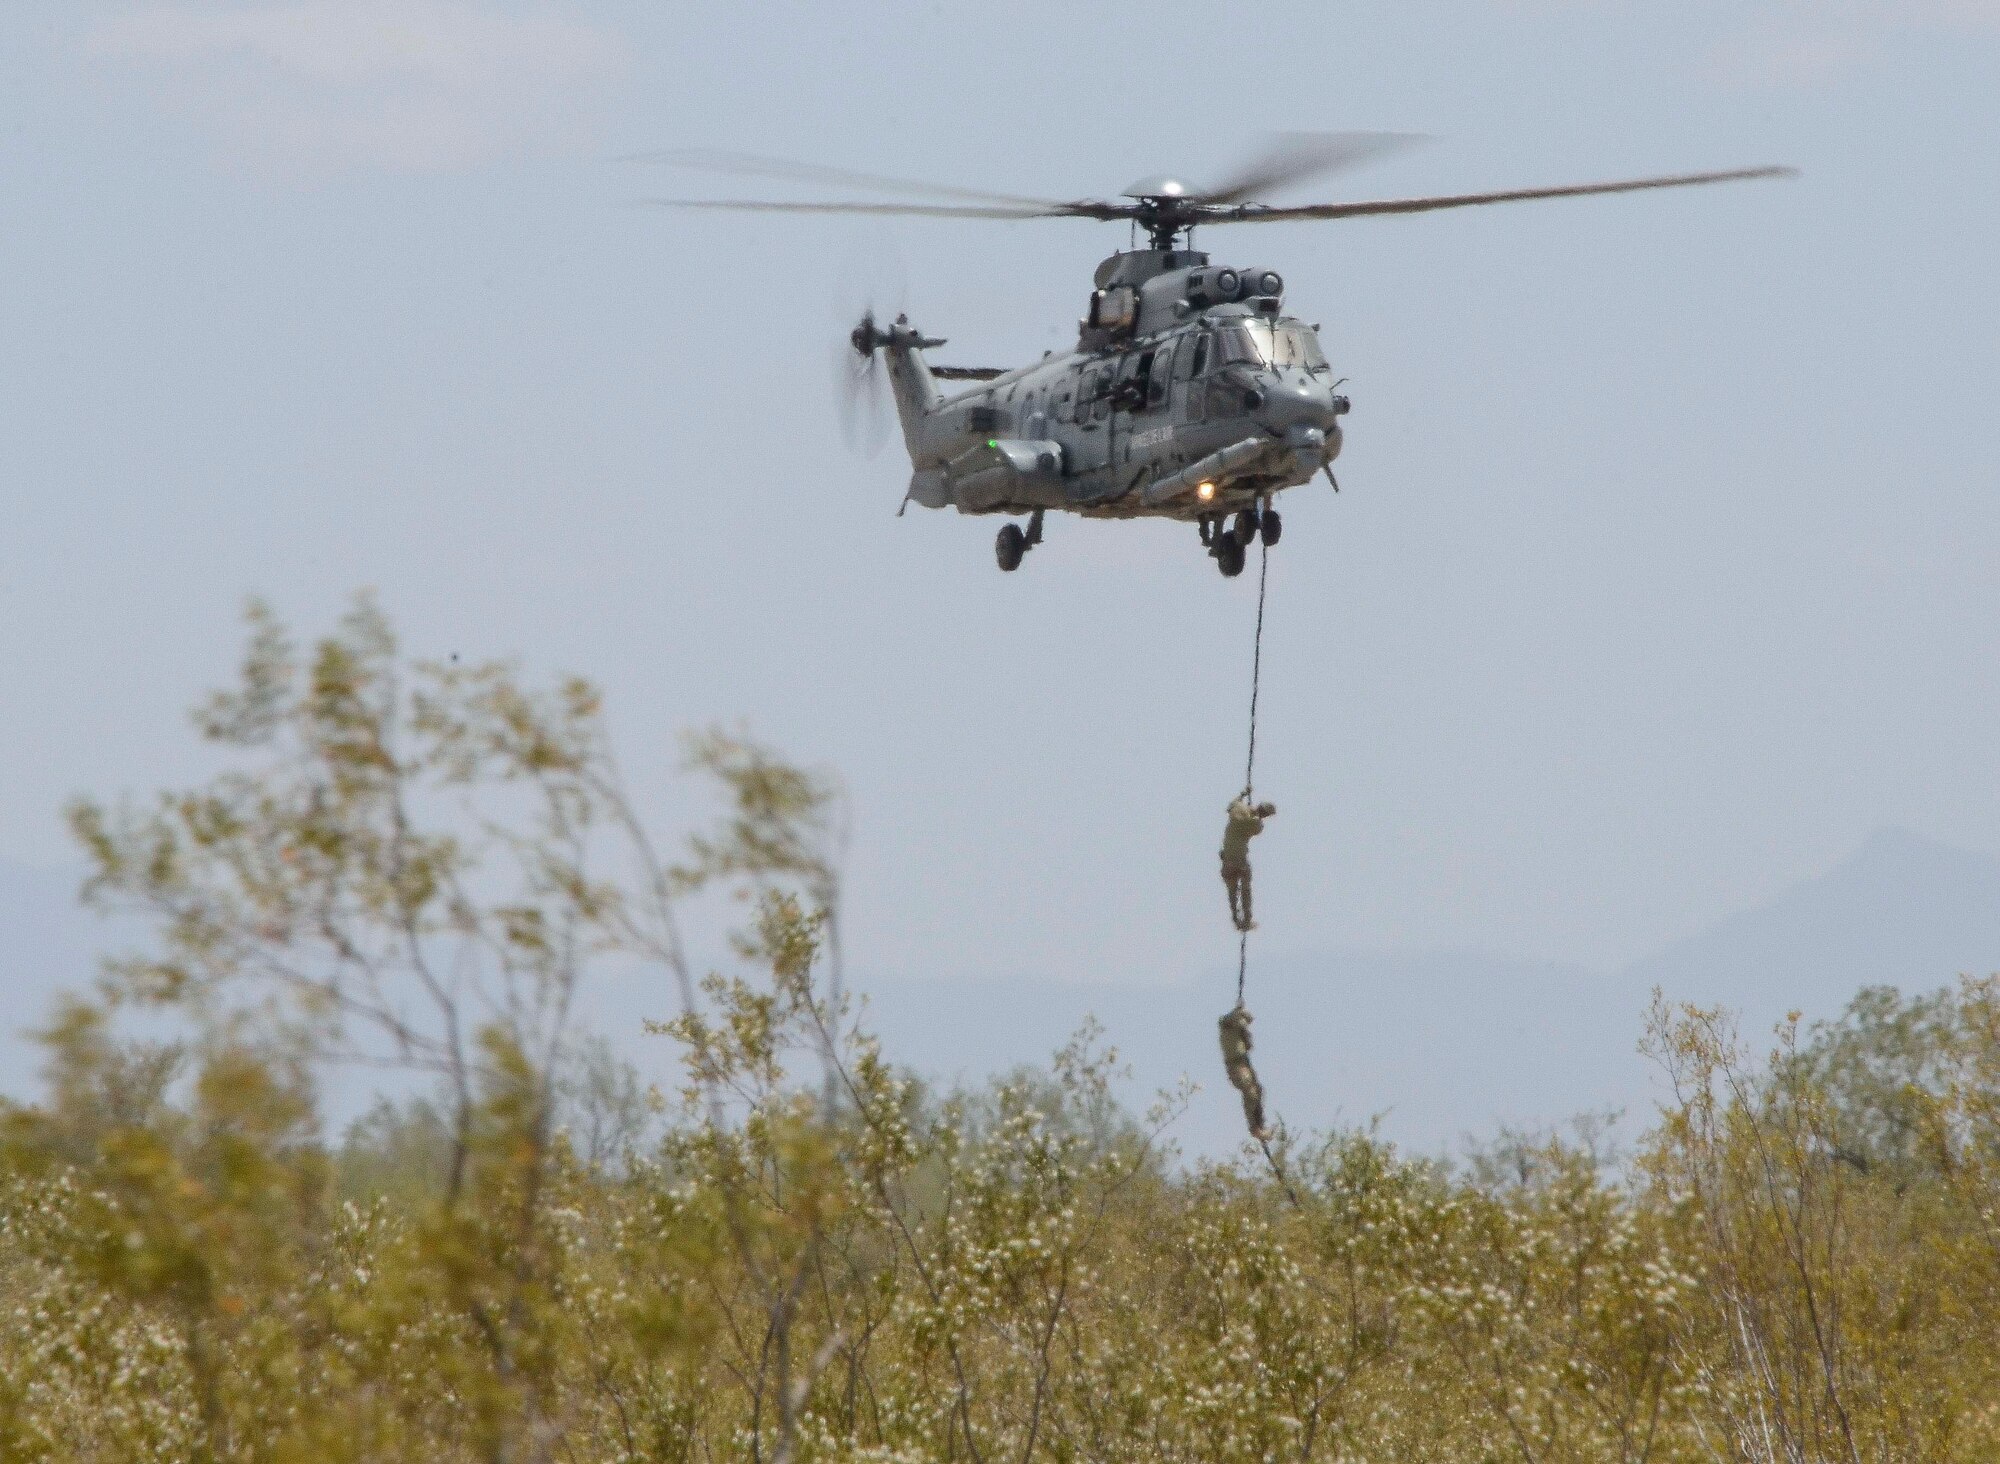 A French Eurocopter EC-735 Caracal hovers while personnel aboard fastrope down during Alternate Insertion Extraction  training during Exercise ANGEL THUNDER May 07, 2014 at Davis-Monthan Air Force Base, Ariz. ANGEL THUNDER 2014 is the largest and most realistic joint service, multinational, interagency combat search and rescue exercise designed to provide training for personnel recovery assets using a variety of scenarios to simulate deployment conditions and contingencies. Personnel recovery forces will train through the full spectrum of personnel recovery capabilities with ground recovery personnel, air assets, Special Forces teams and federal agents. (U.S. Air Force photo by Staff Sgt. Adam Grant/Released)